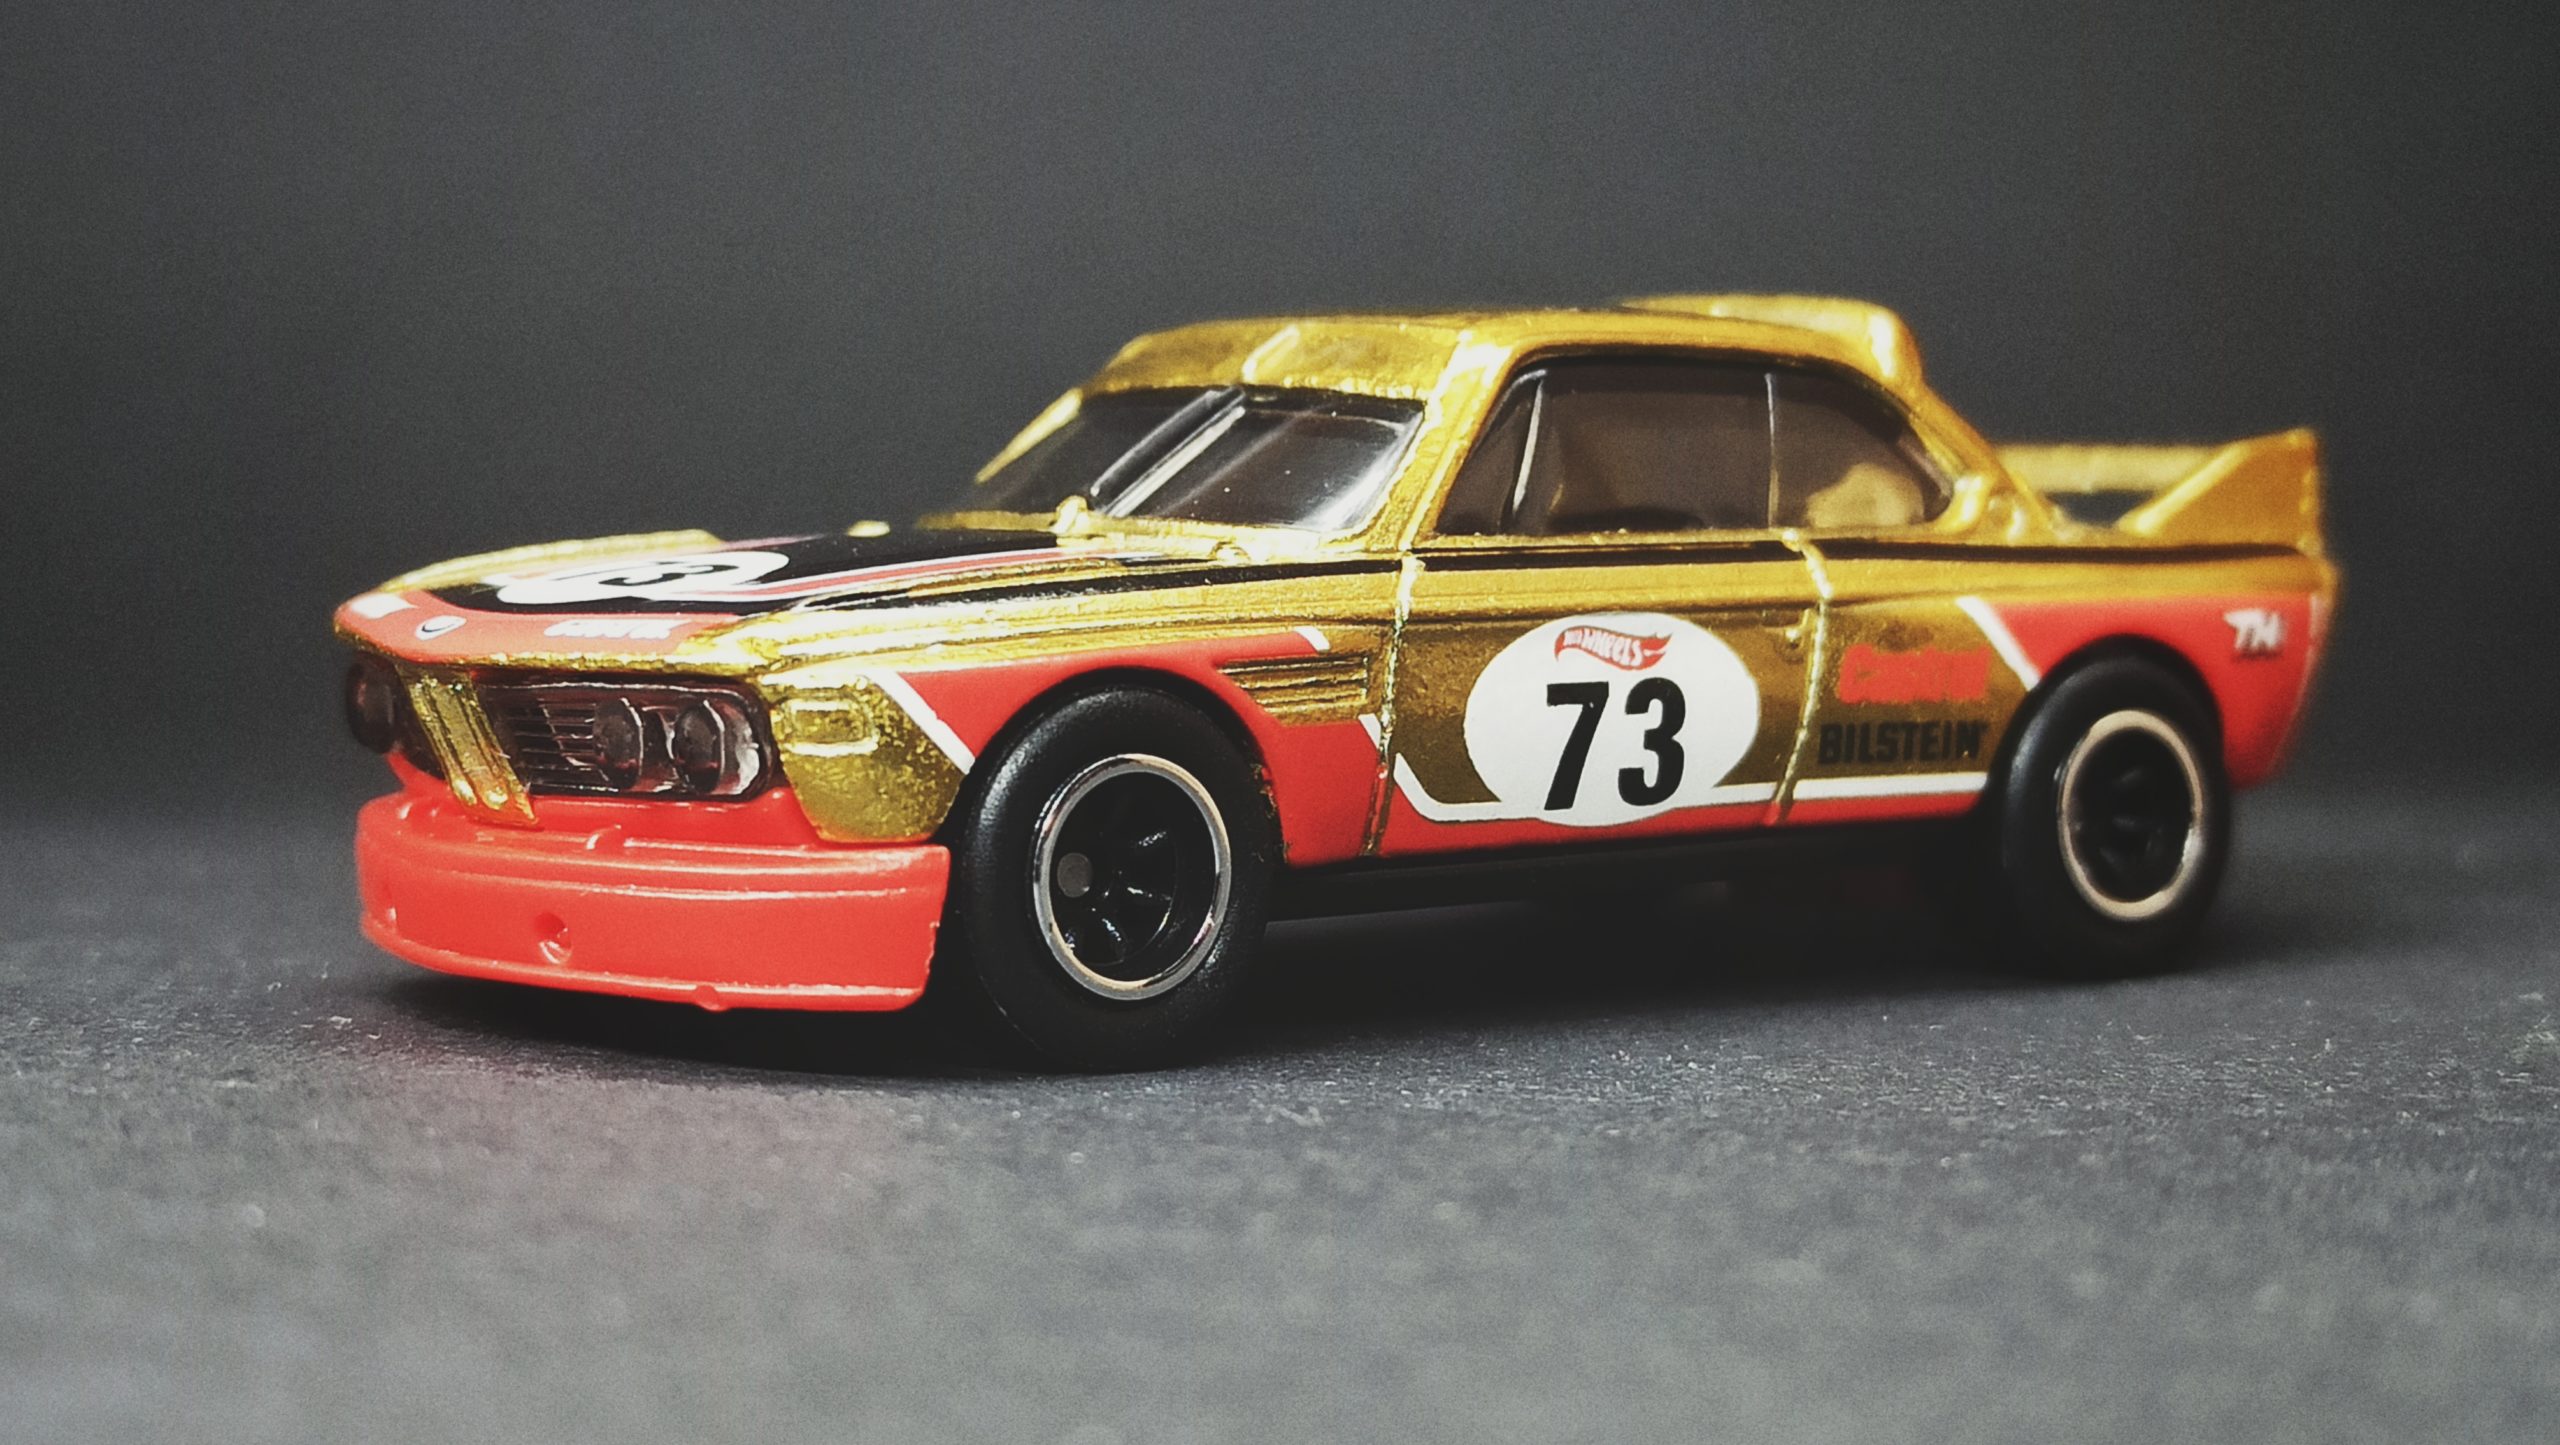 Hot Wheels '73 BMW 3.0 CSL Race Car (HCY20) 2022 (34/250) Retro Racers (2/10) spectraflame yellow (gold) Super Treasure Hunt (STH) side angle